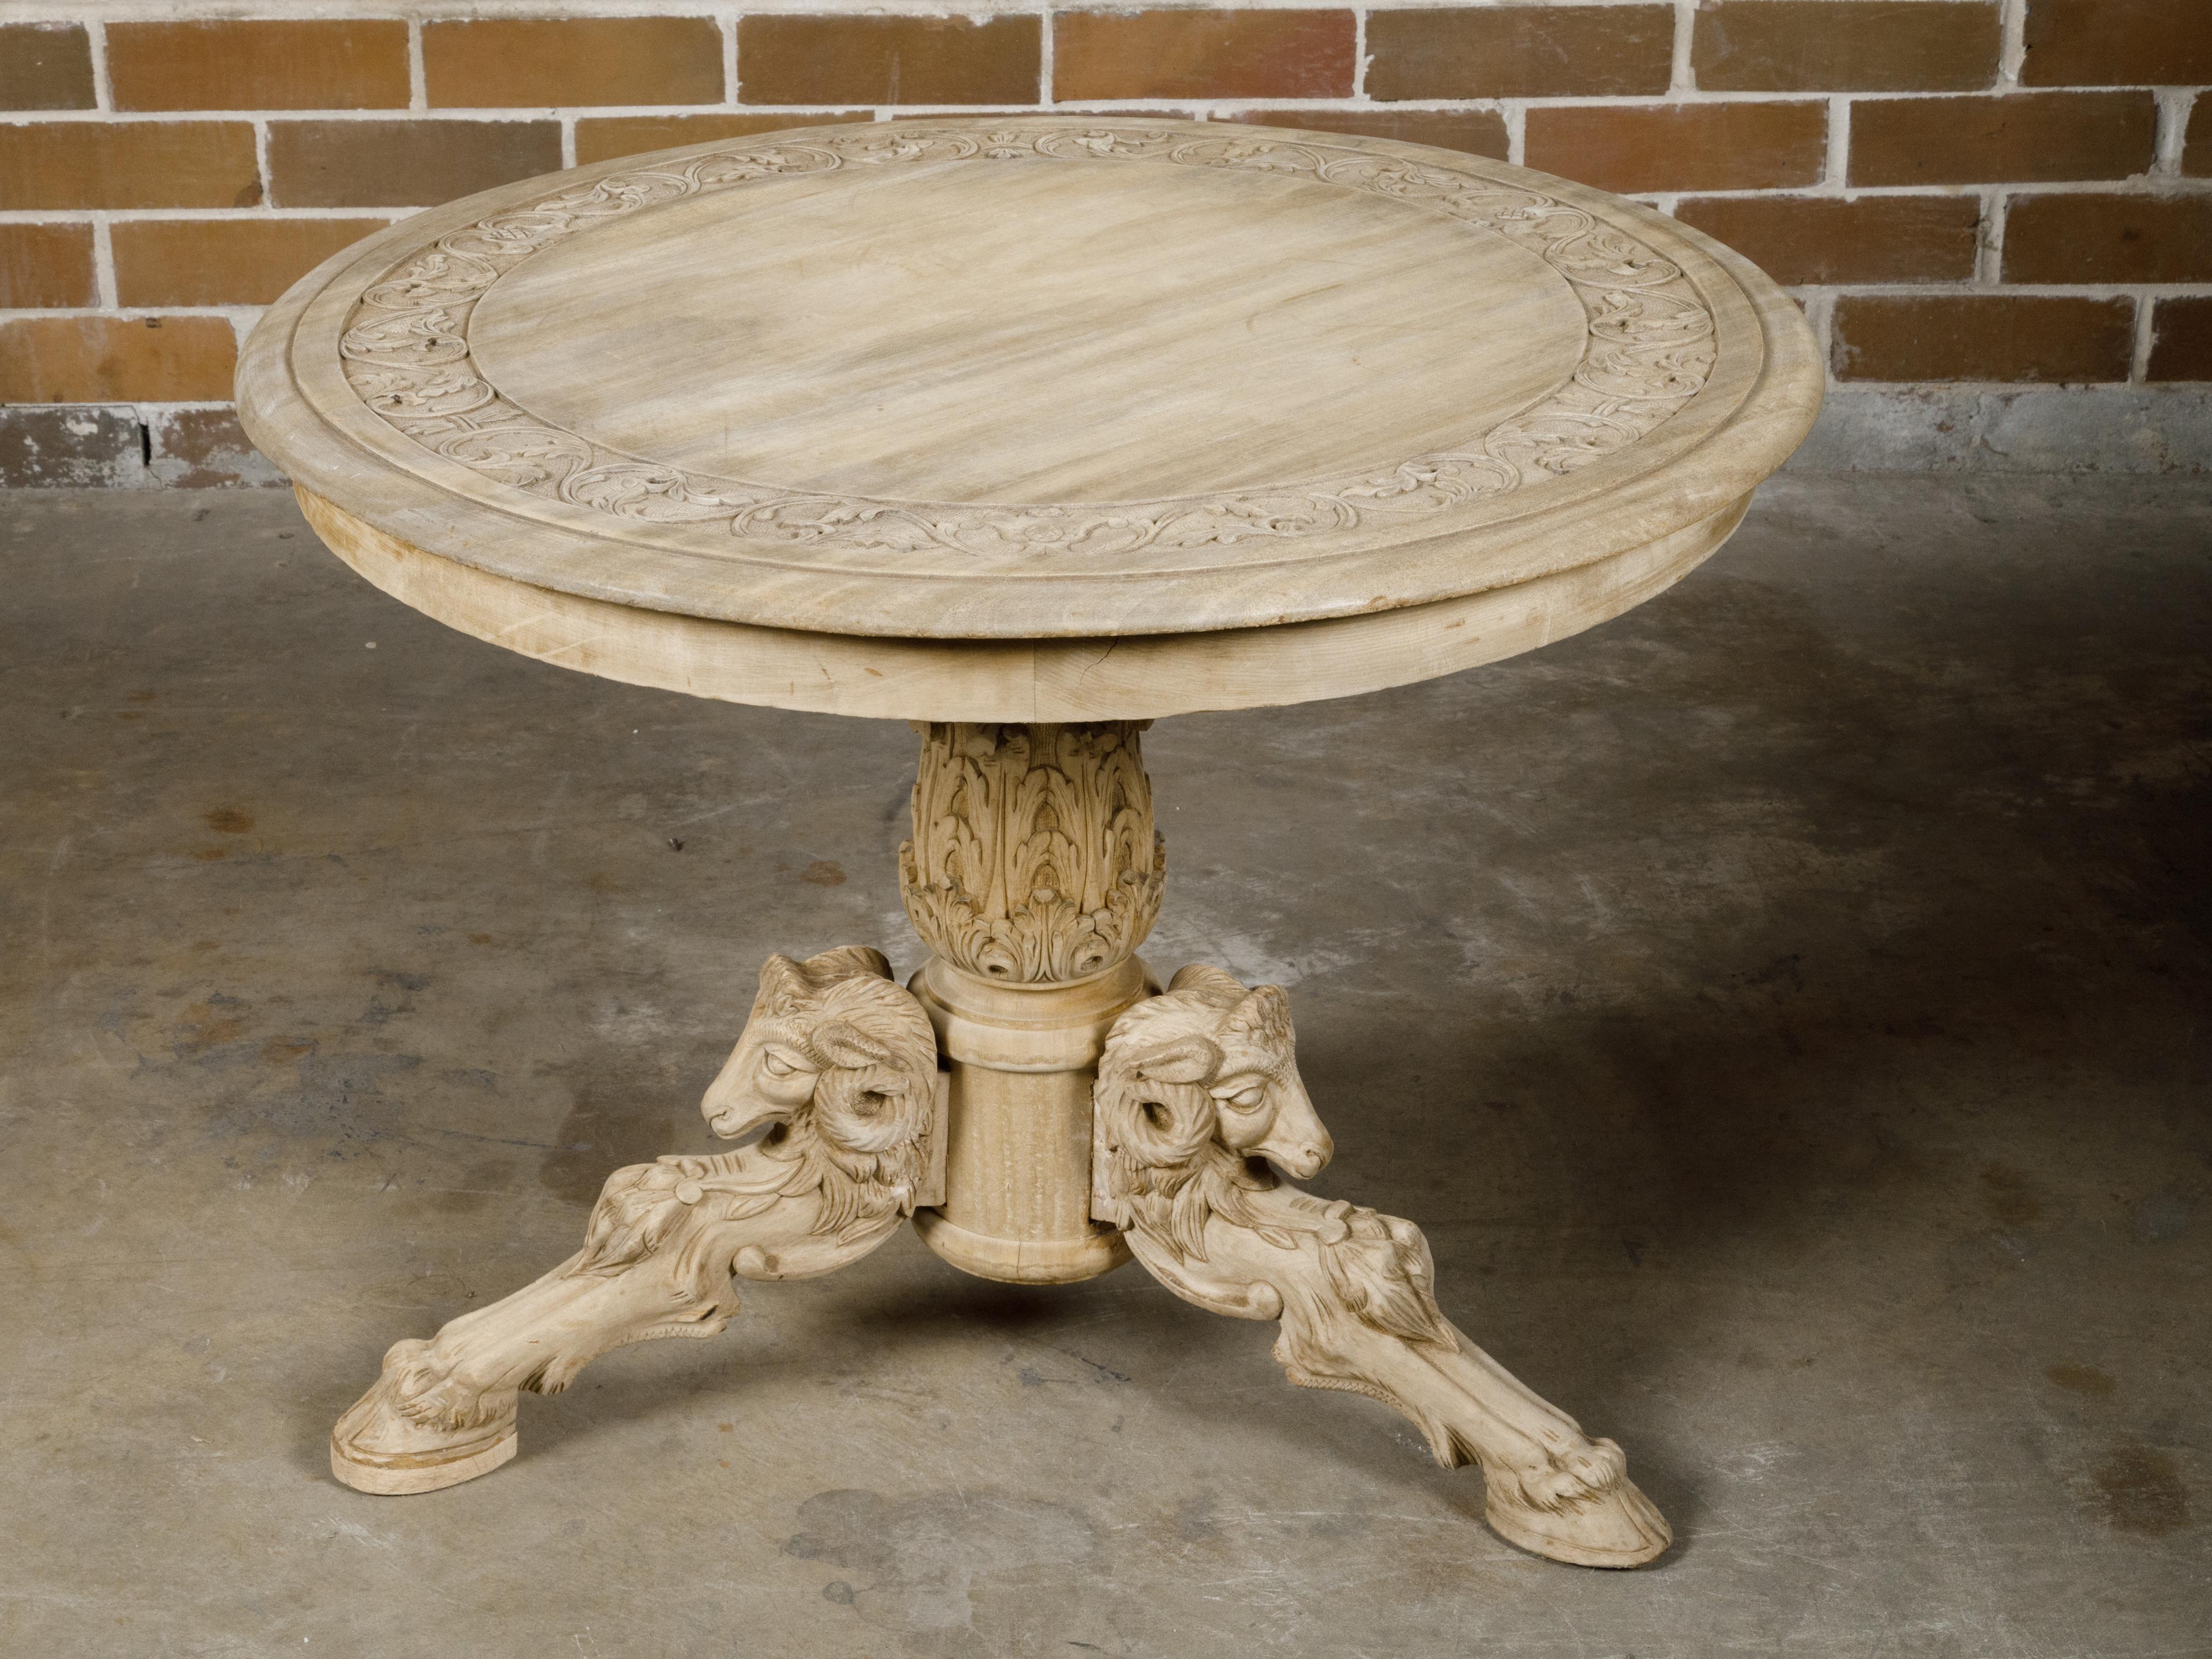 French 1900s Round Top Pedestal Table with Carved Rams' Heads and Scrollwork For Sale 9